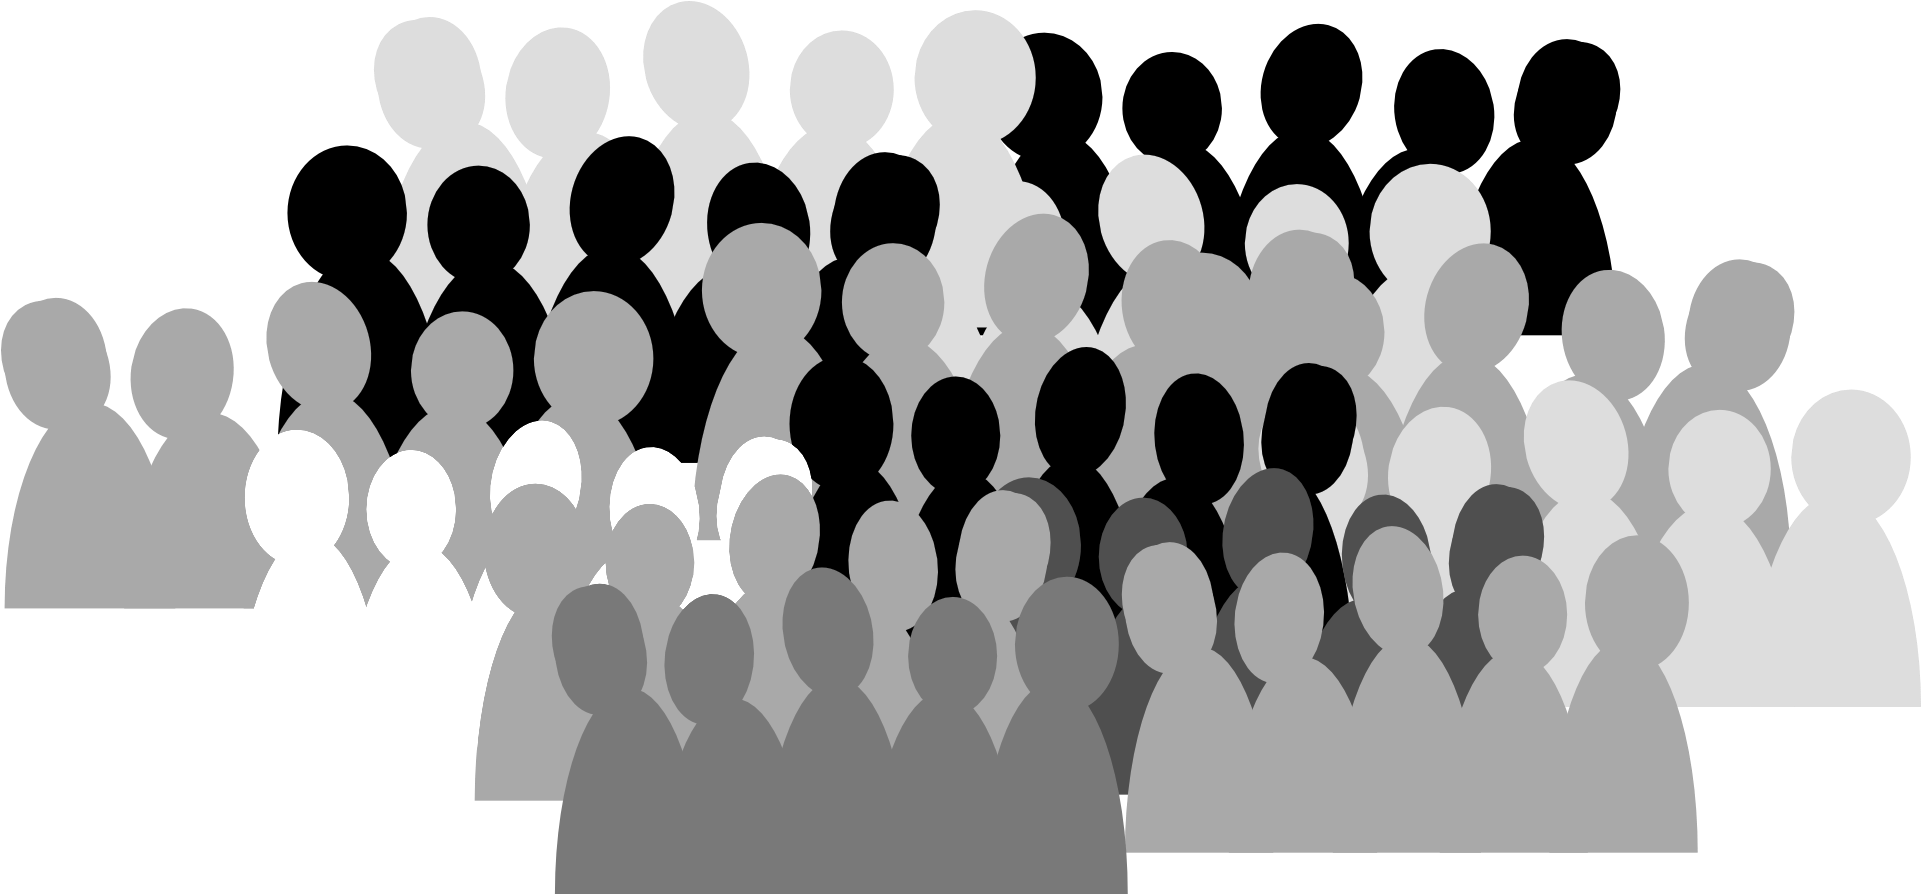 People Top View Png Crowd Clipart Transparent Background